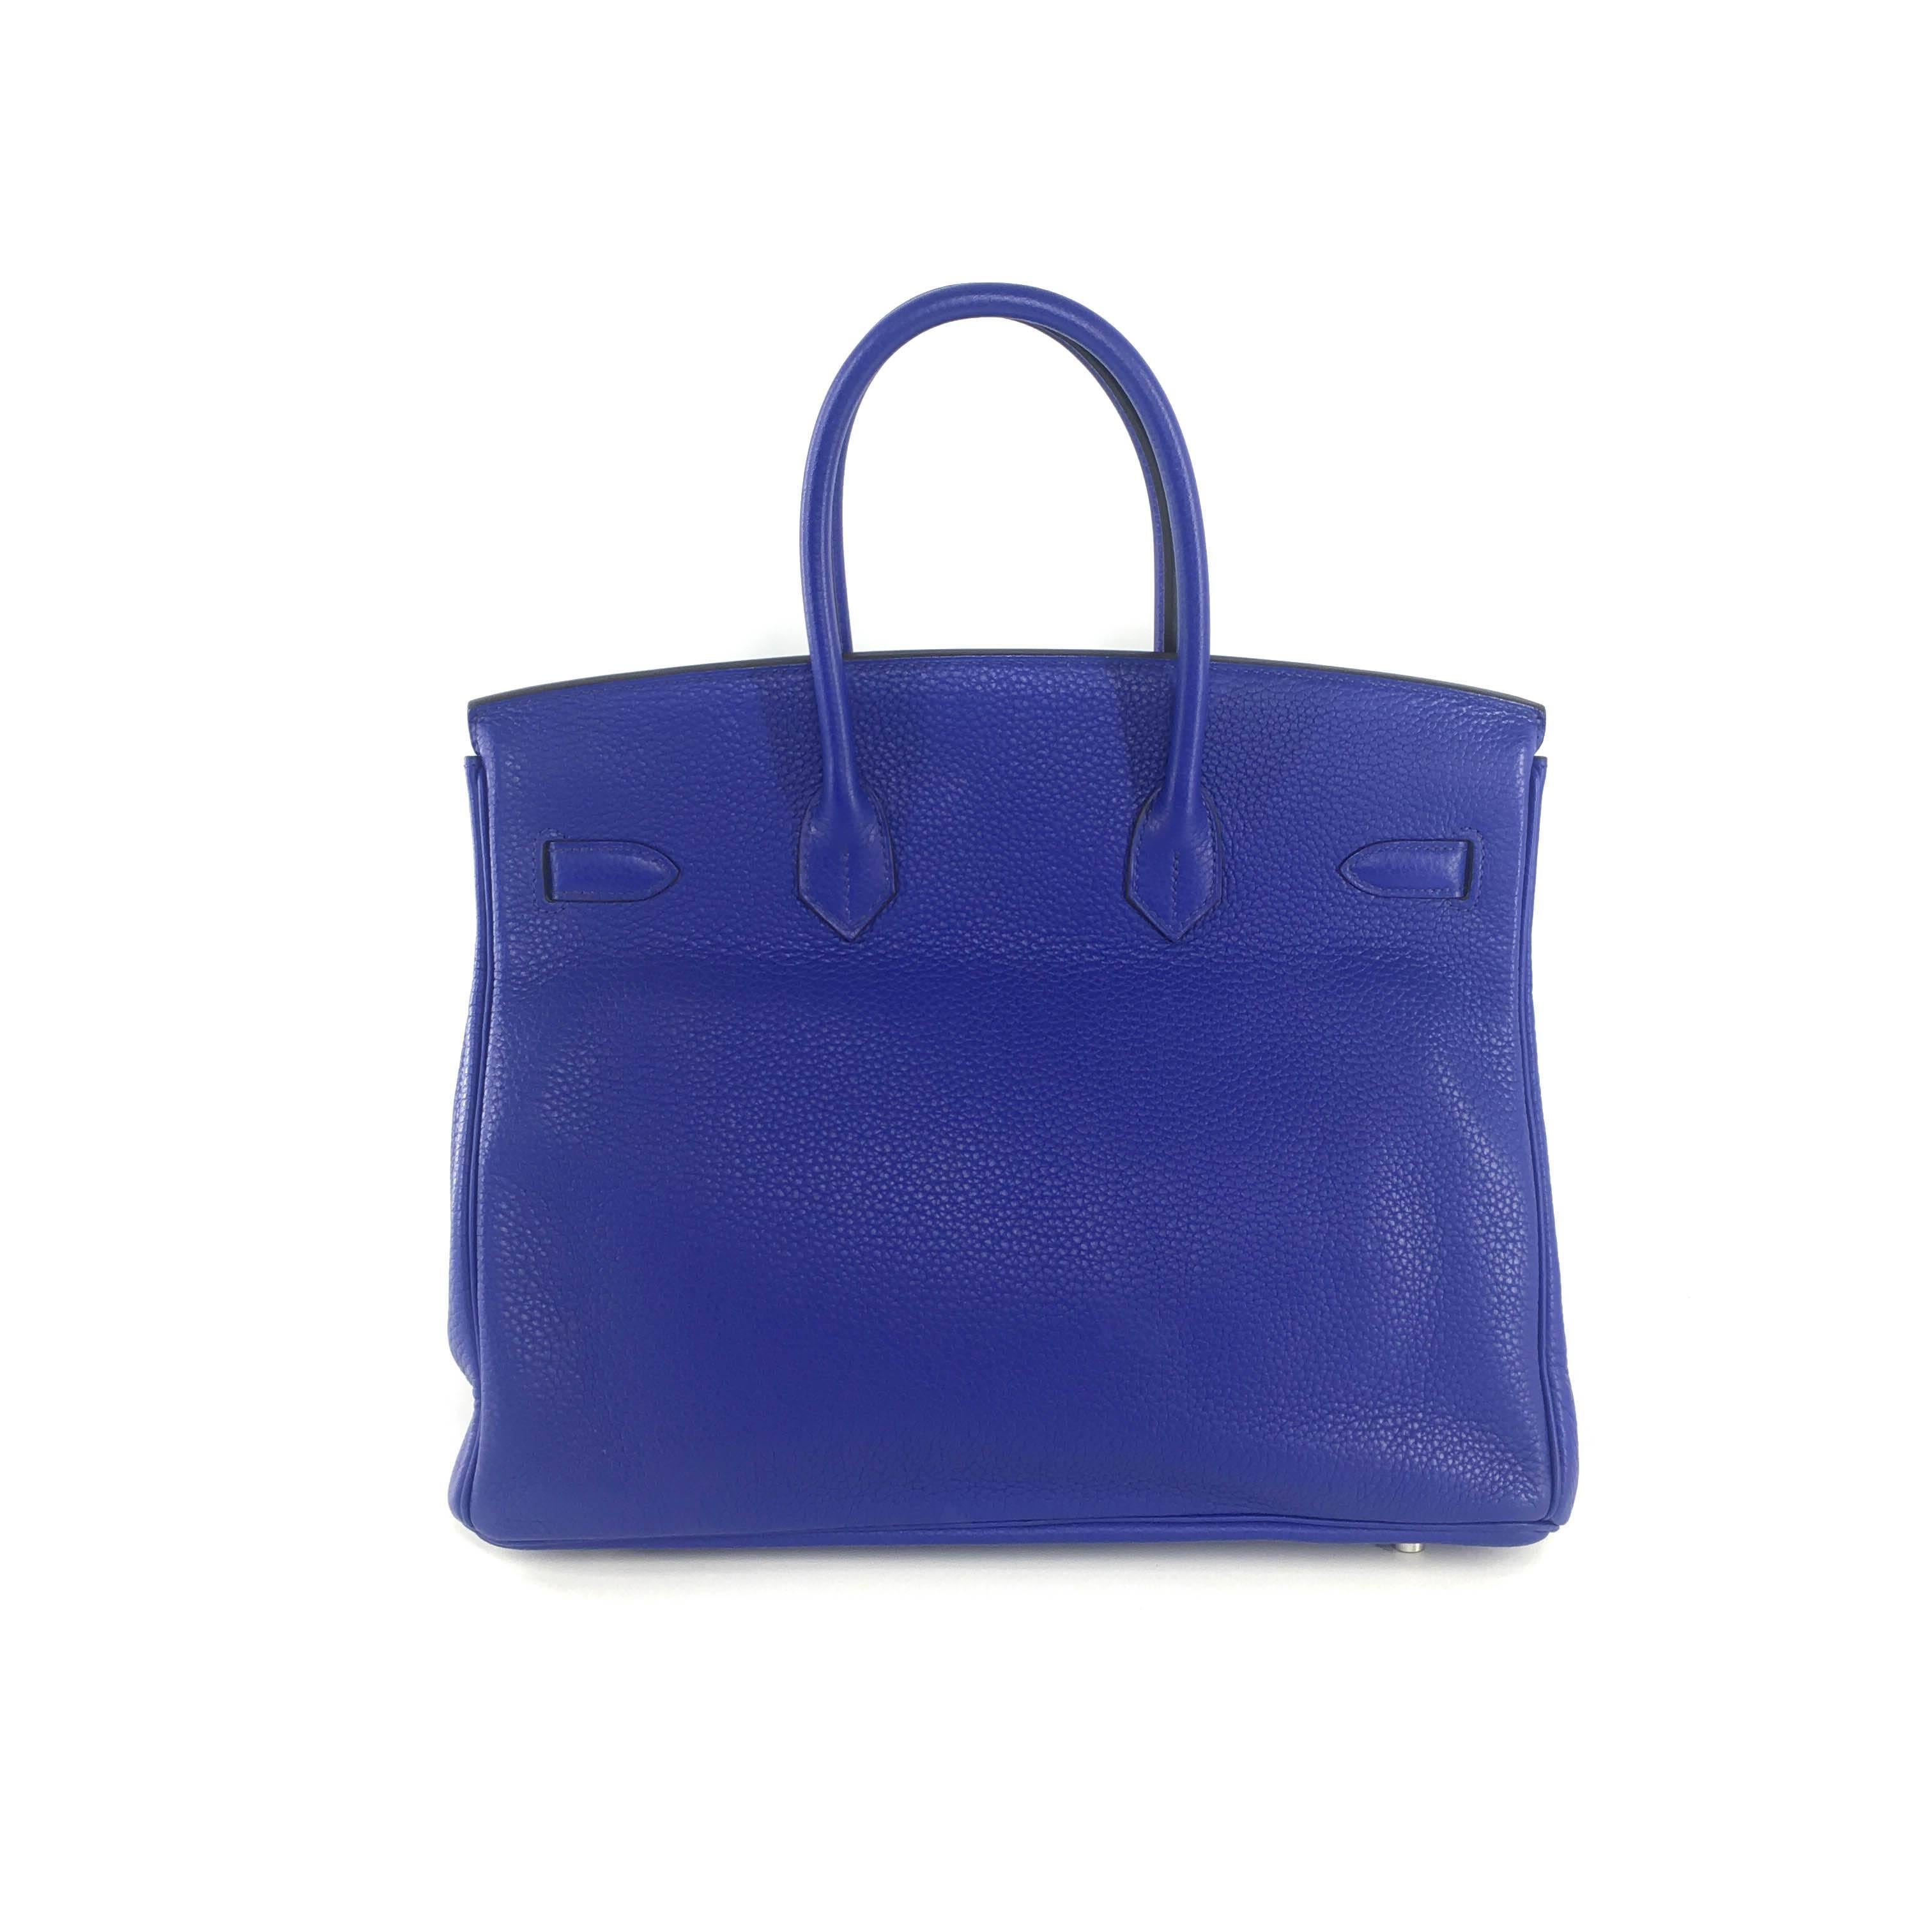 This Hermes Birkin 35 Blue Electric Togo leather with Palladium Hardware bag is guaranteed to catch attention with its colour and classic construction. This bag is guaranteed to be 100% authentic.

Includes: Lock and Keys, Dust Bag, Rain coat,